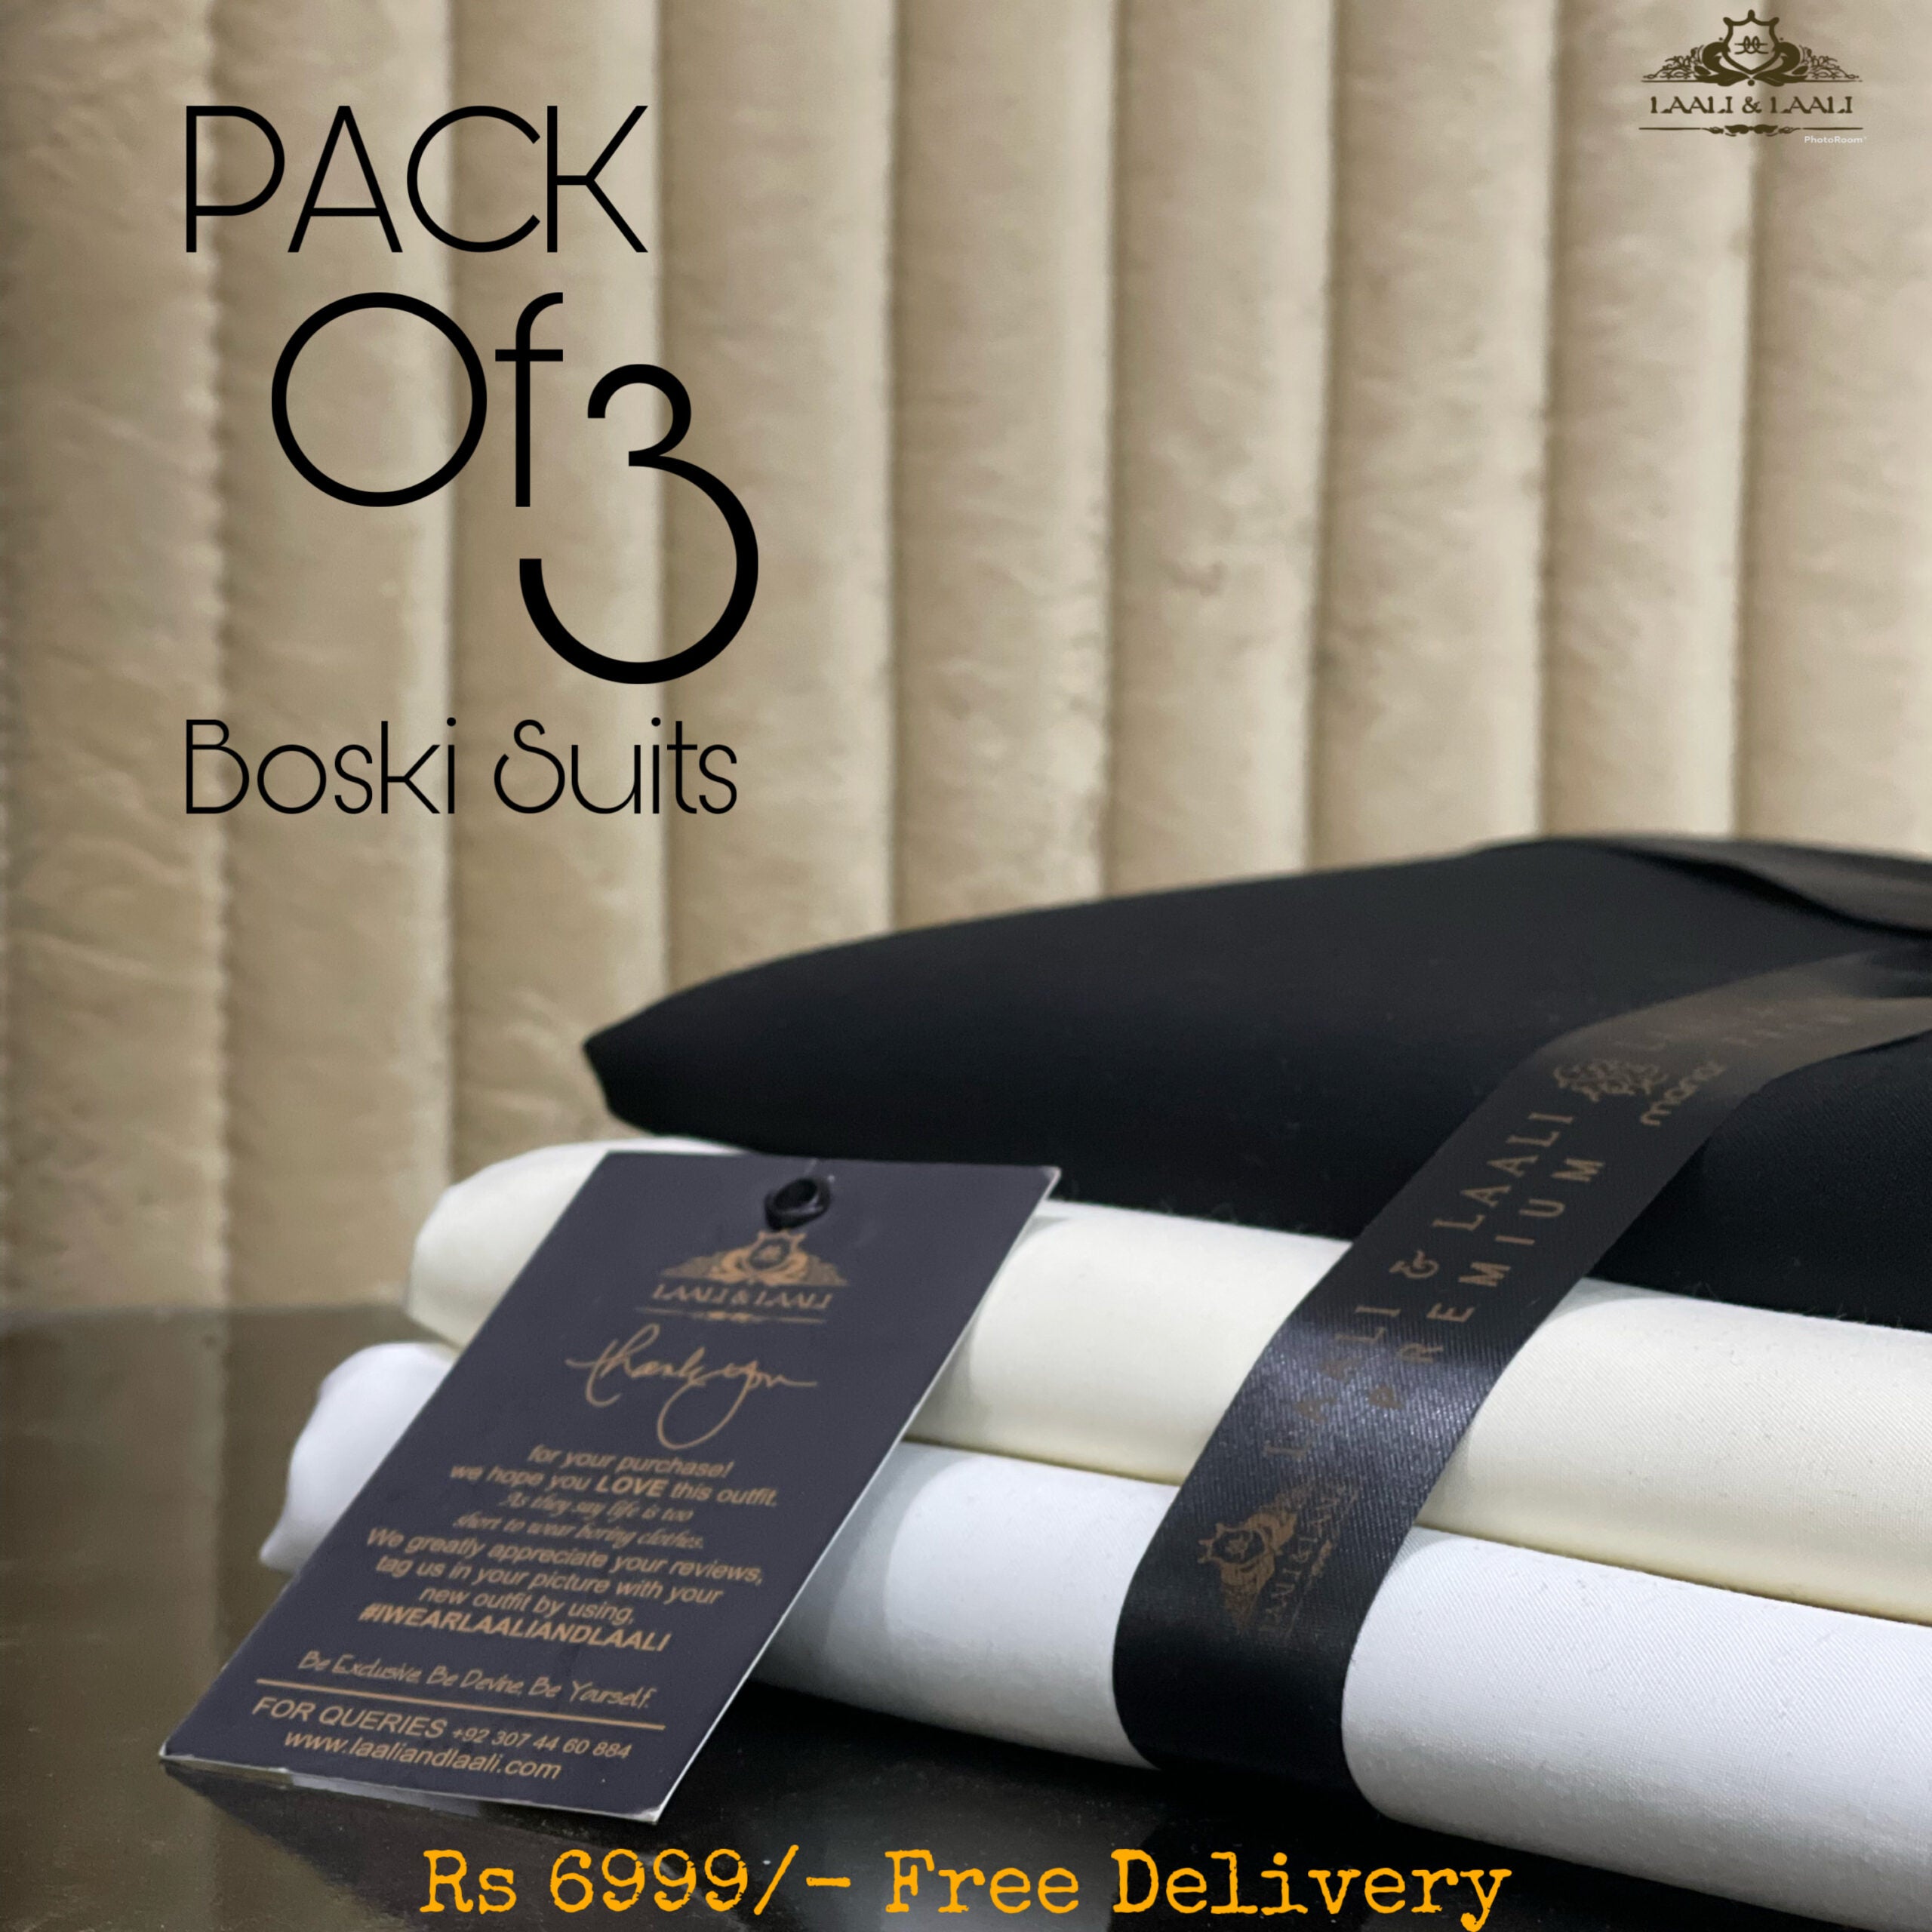 PACK OF 3 BOSKI SUITS